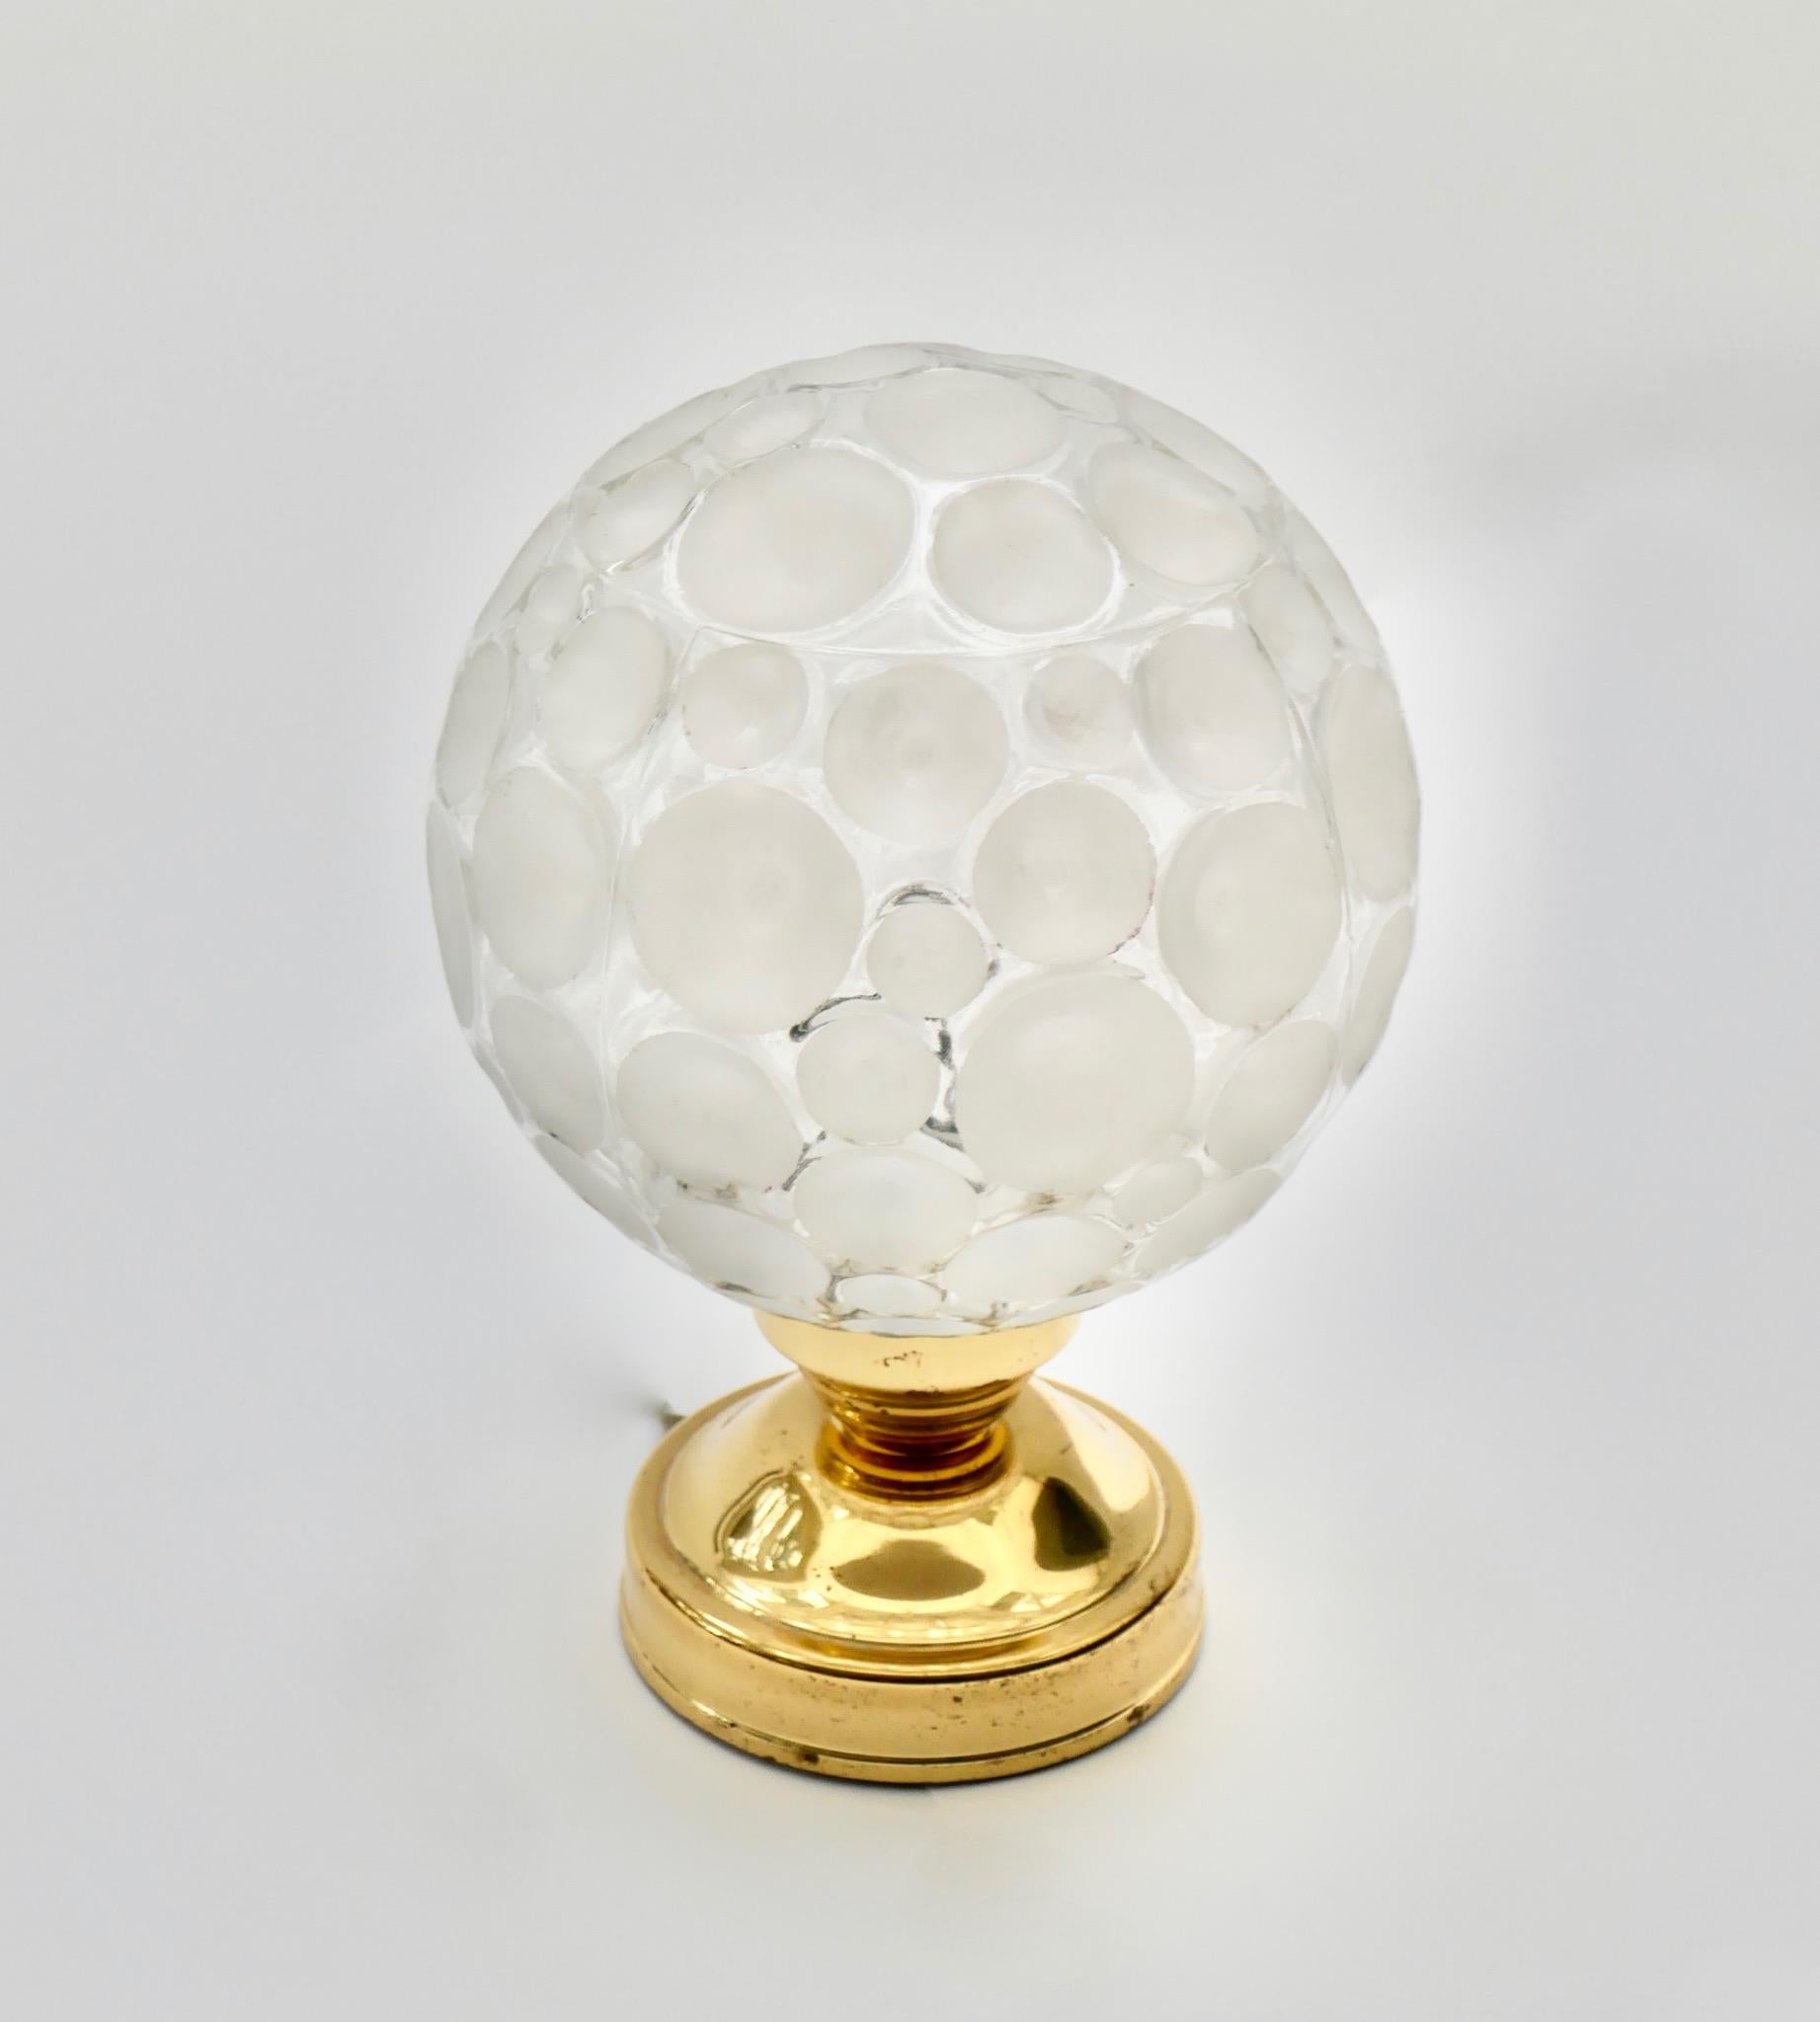 Brass and glass globe table lamp, Germany, 1970s.